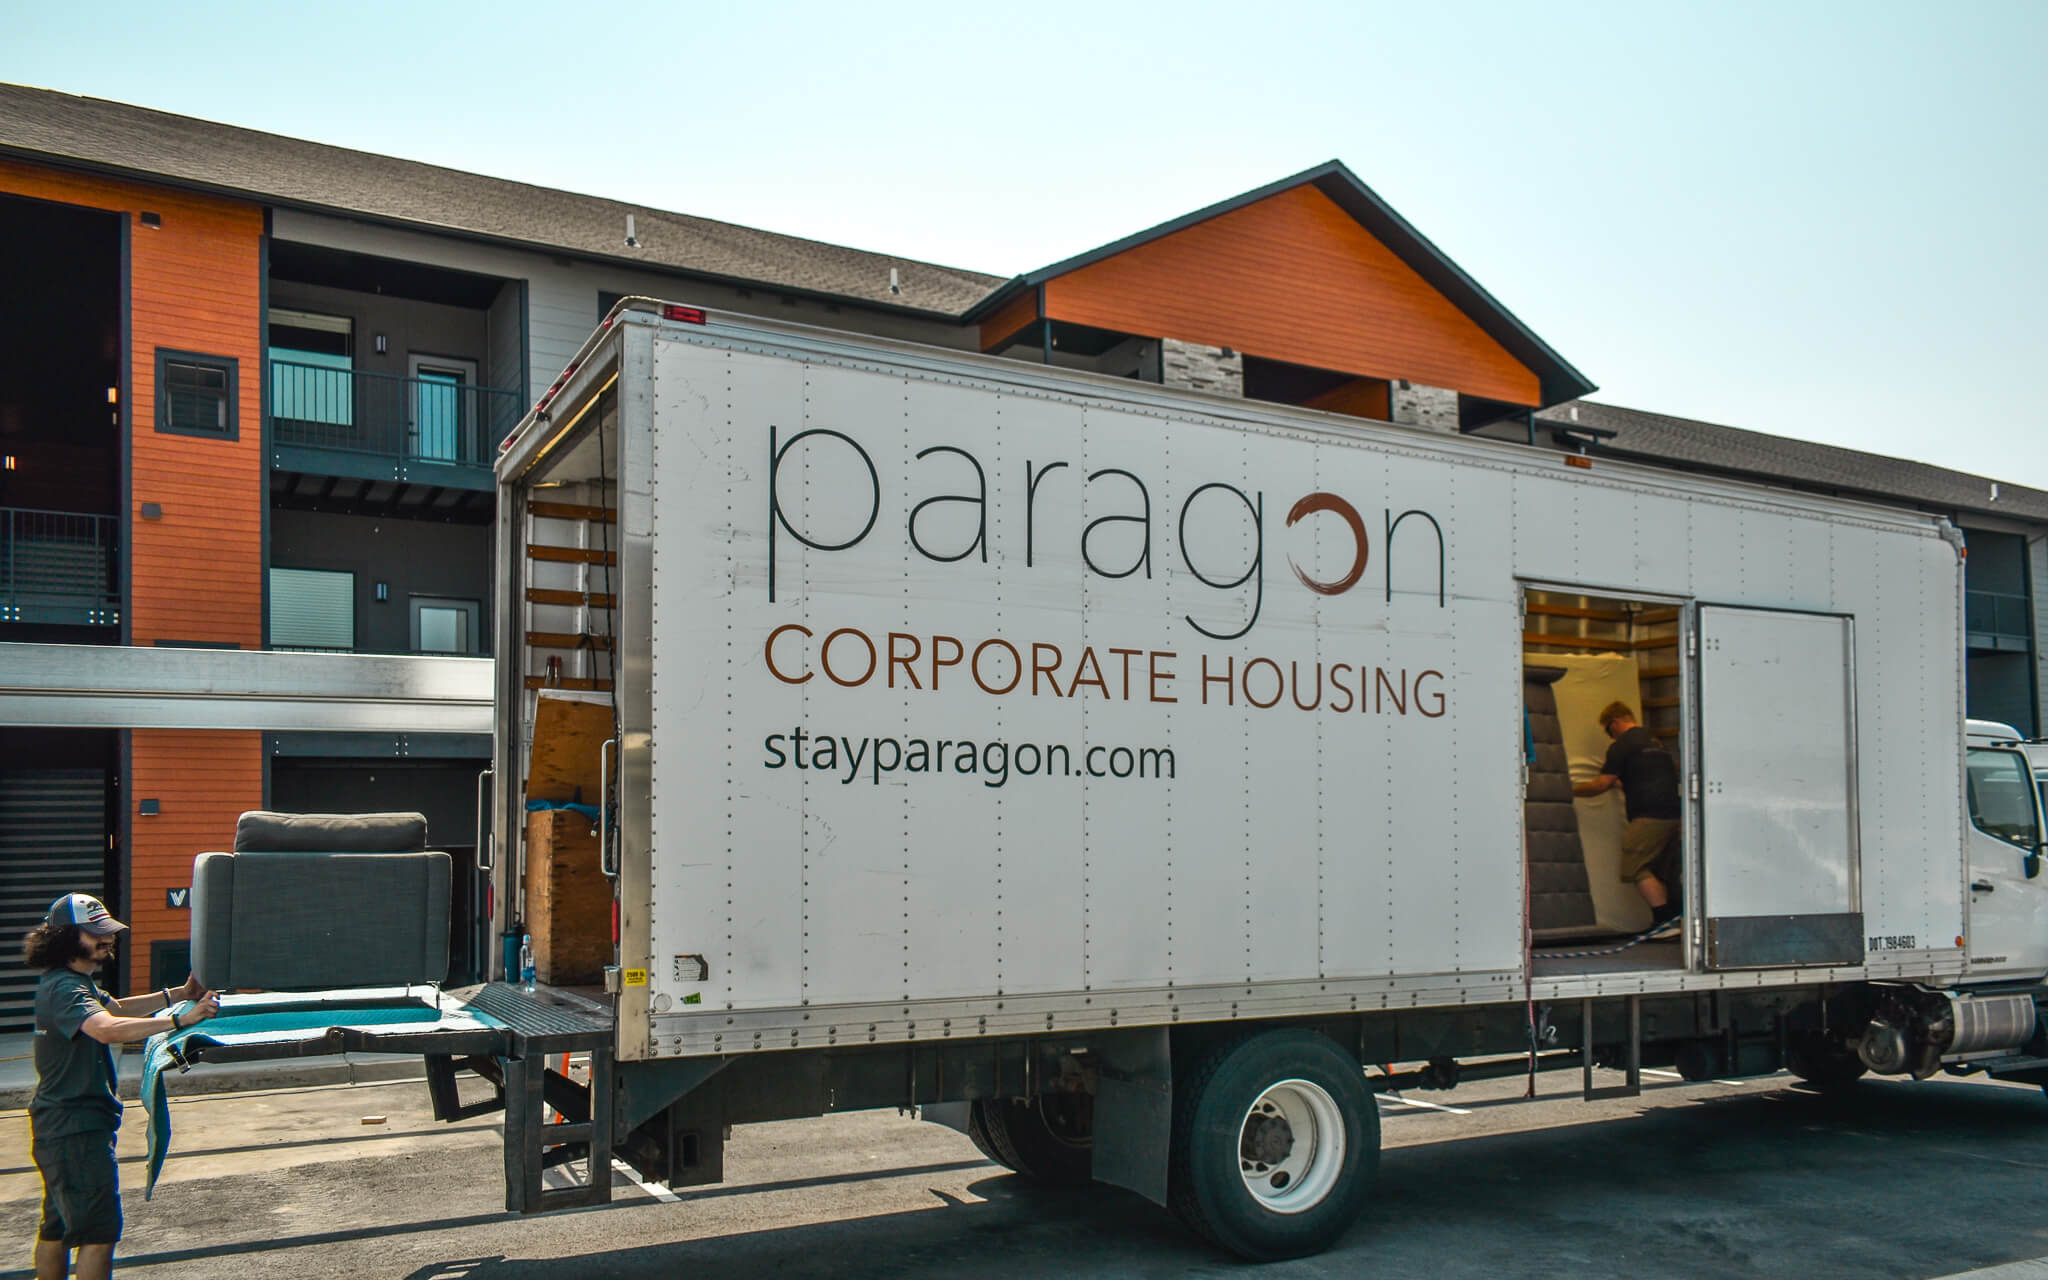 Paragon Corporate Housing - News - Welcome To The New Stayparagon.com